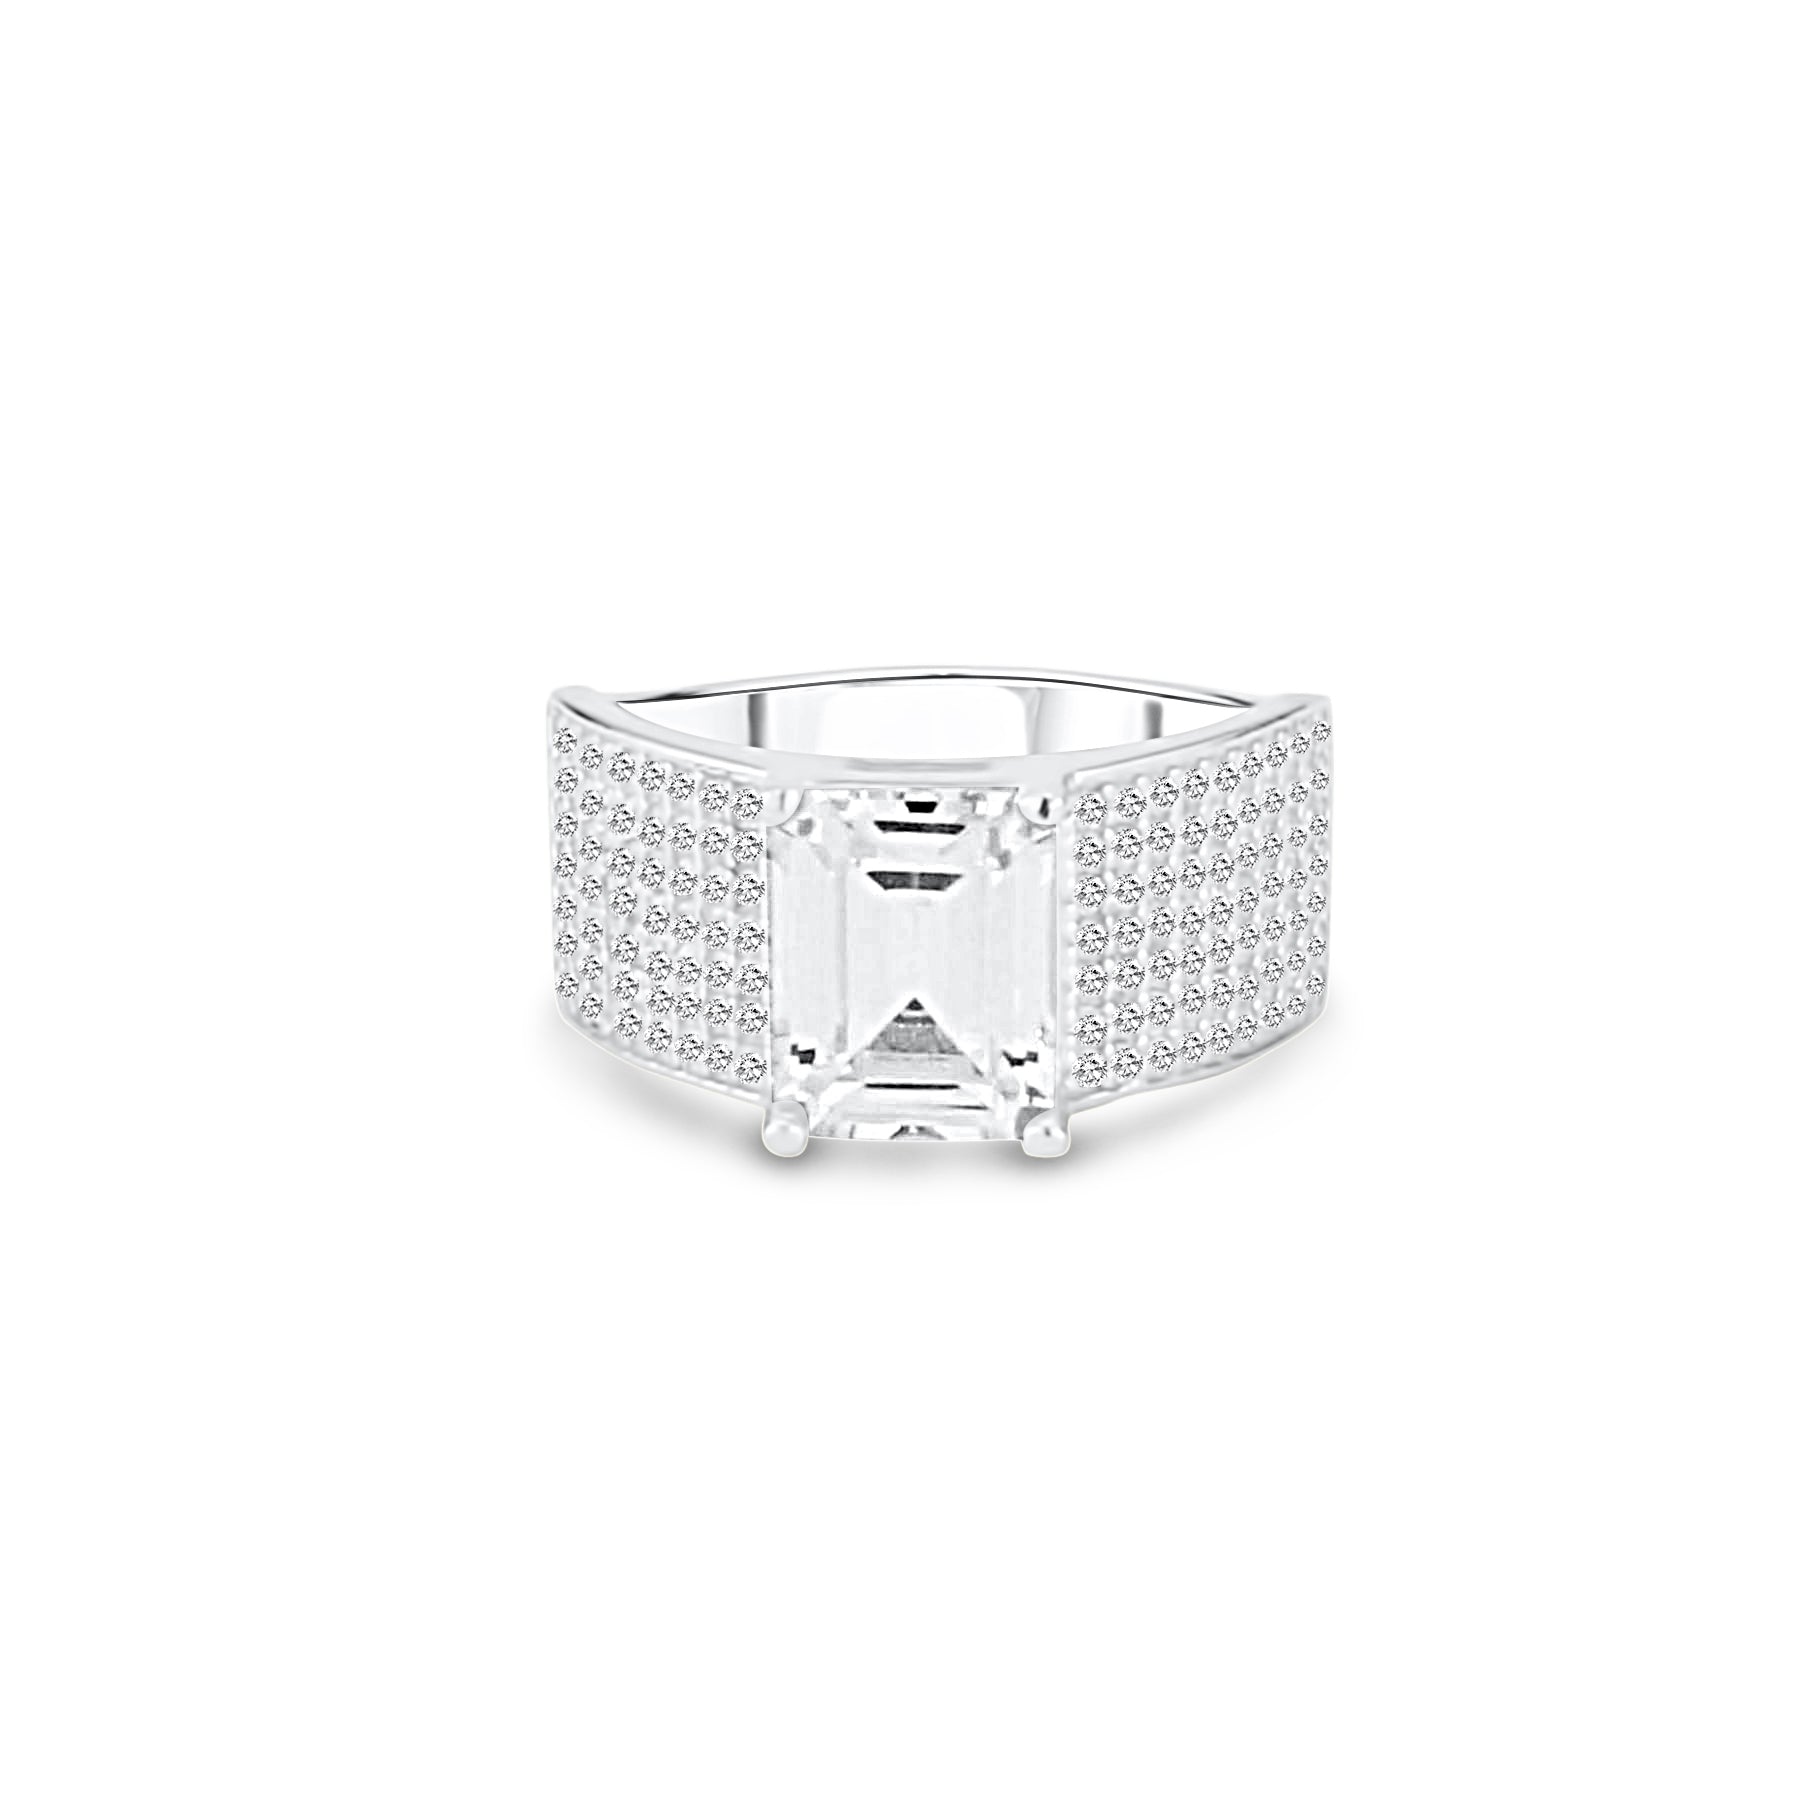 Wide Pave Center Stone Band